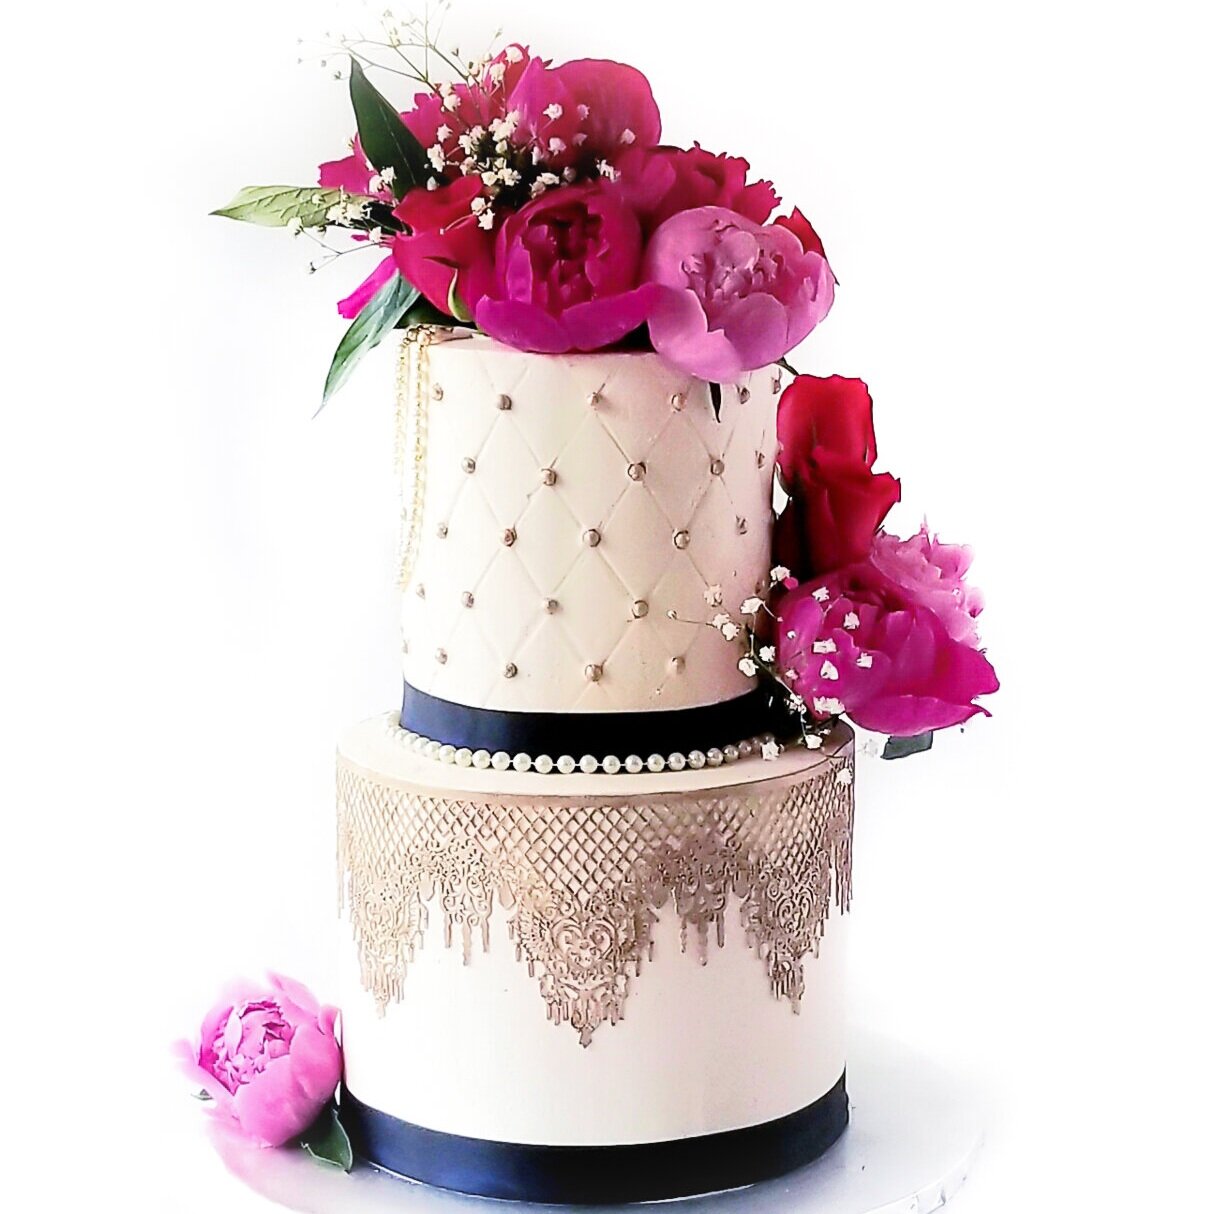 Details more than 123 wedding cakes ct best